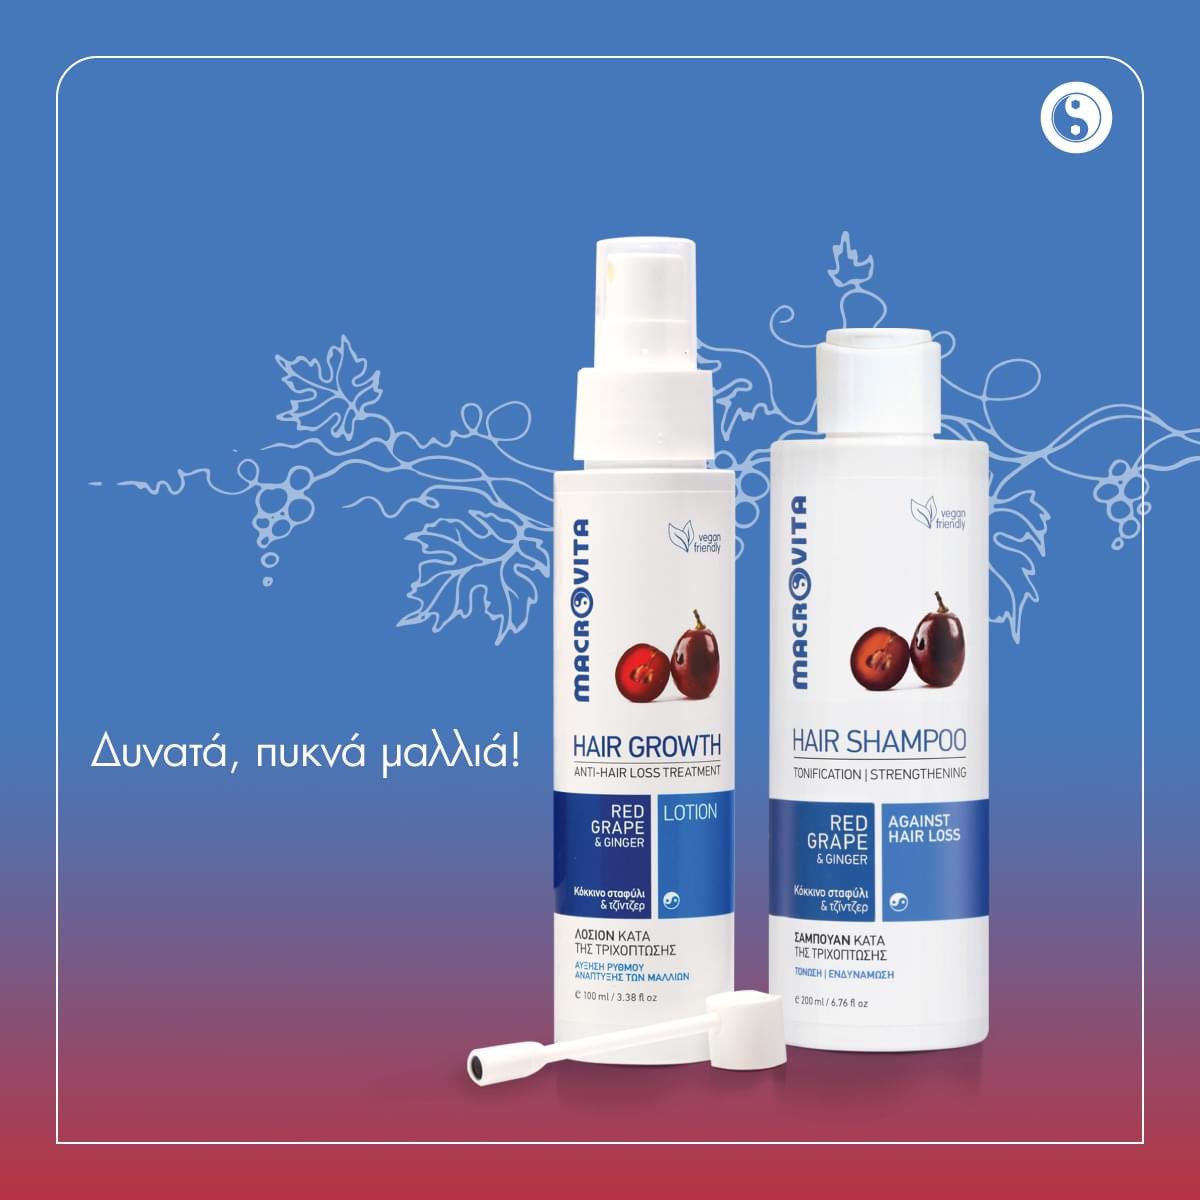 Hair Growth Anti-Hair Loss Lotion with Red Grape & Ginger:
✅ Activates the hair's life cycle
✅ Increases hair growth rate
✅ Reduces hair loss
✅ Visibly improves their health and appearance.
#MacrovitaCanada #RedGrape #HairLossTreatment #HairThinning #HairRegrowth #HairLoss